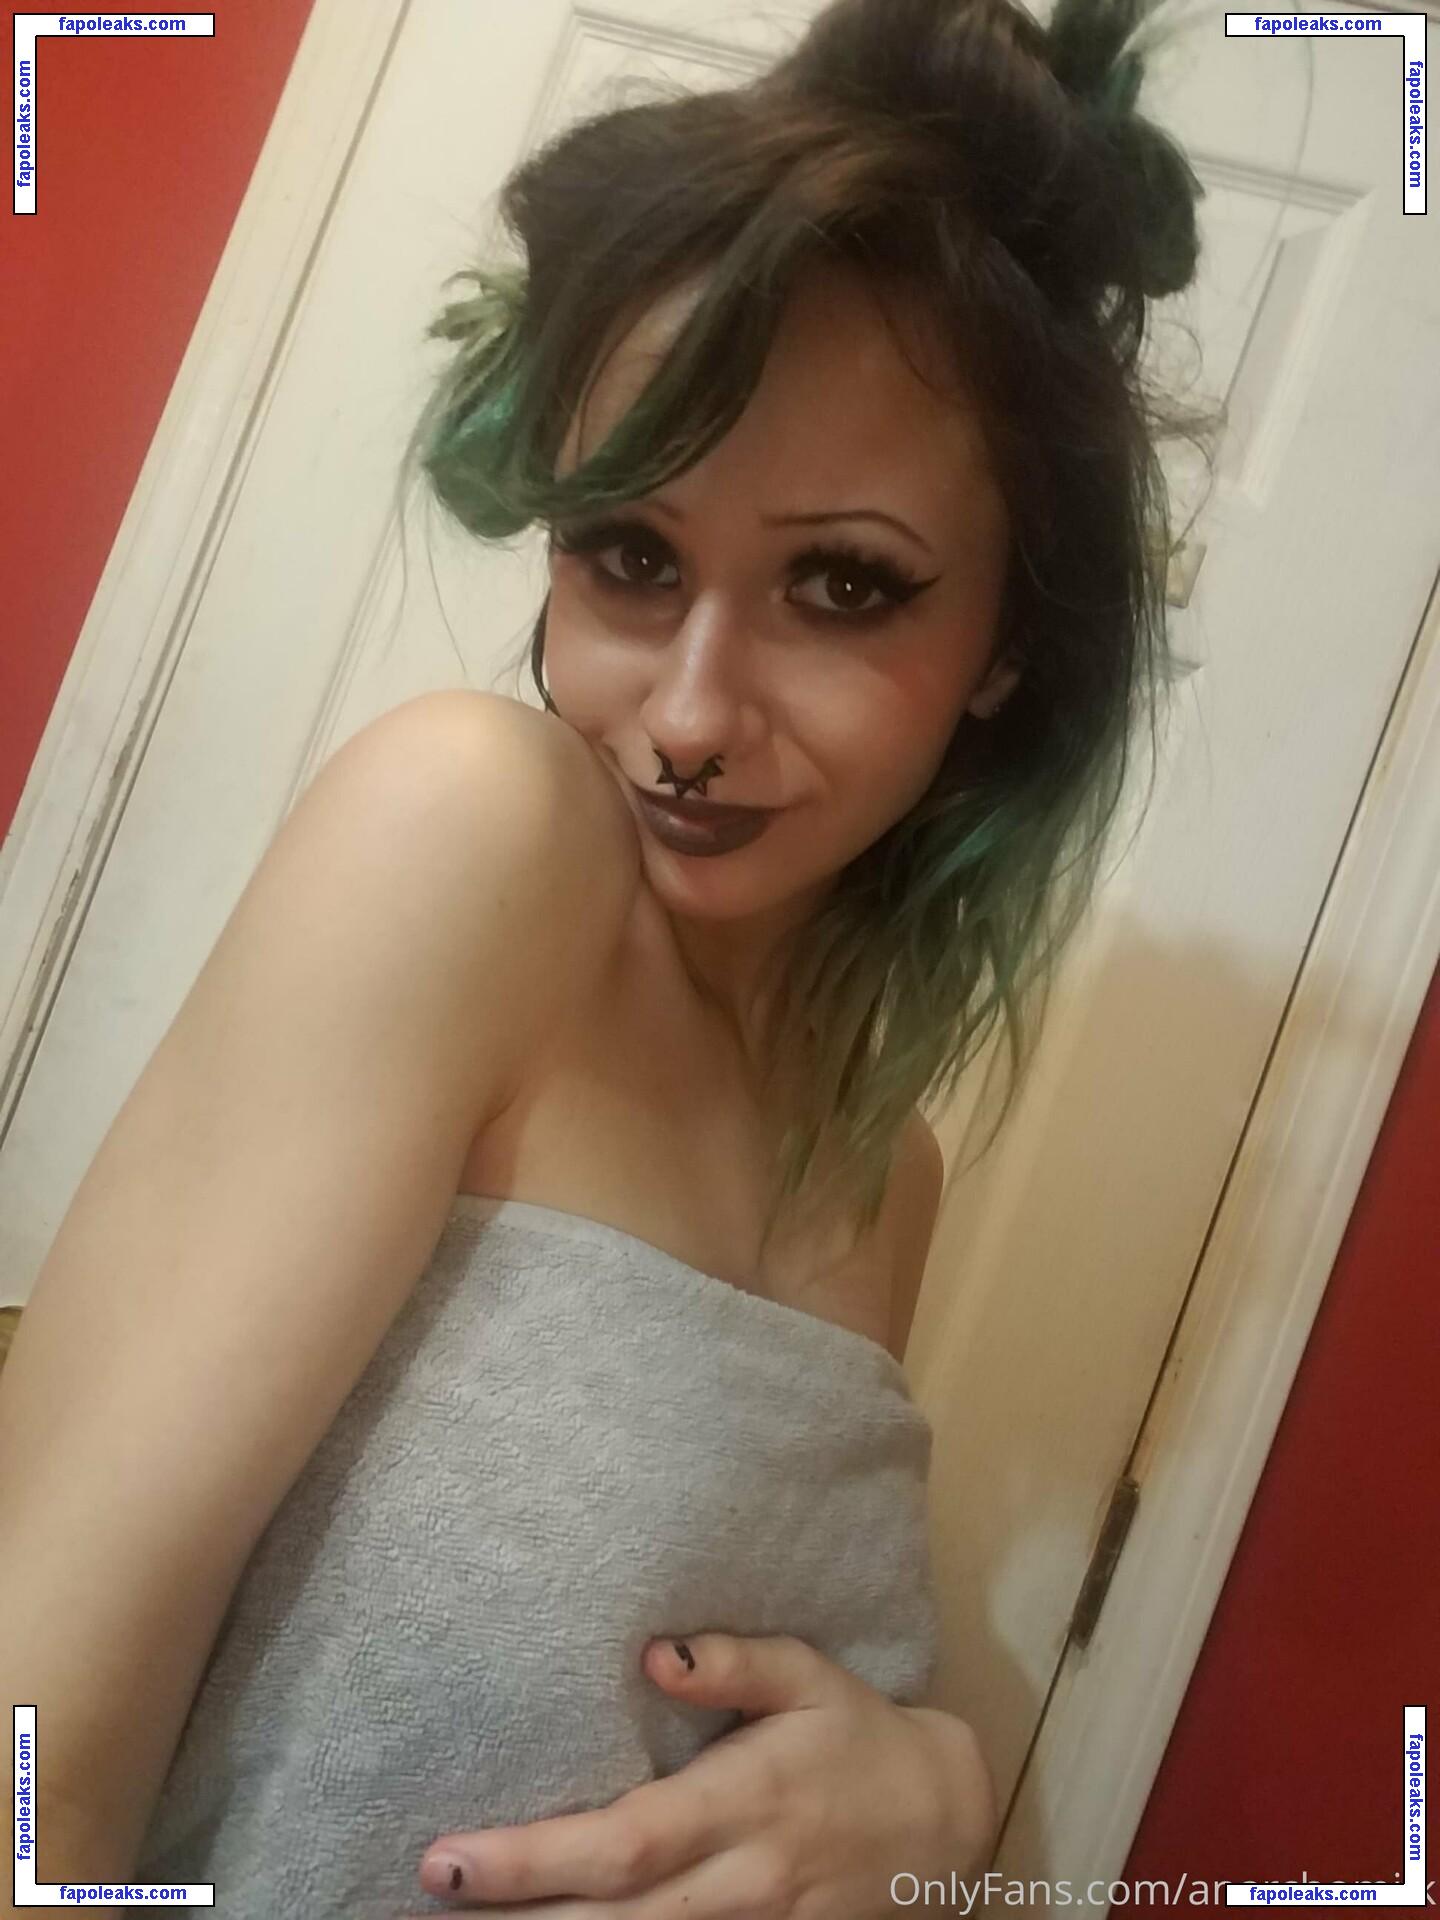 anarchomilk / anarchistmilk nude photo #0005 from OnlyFans